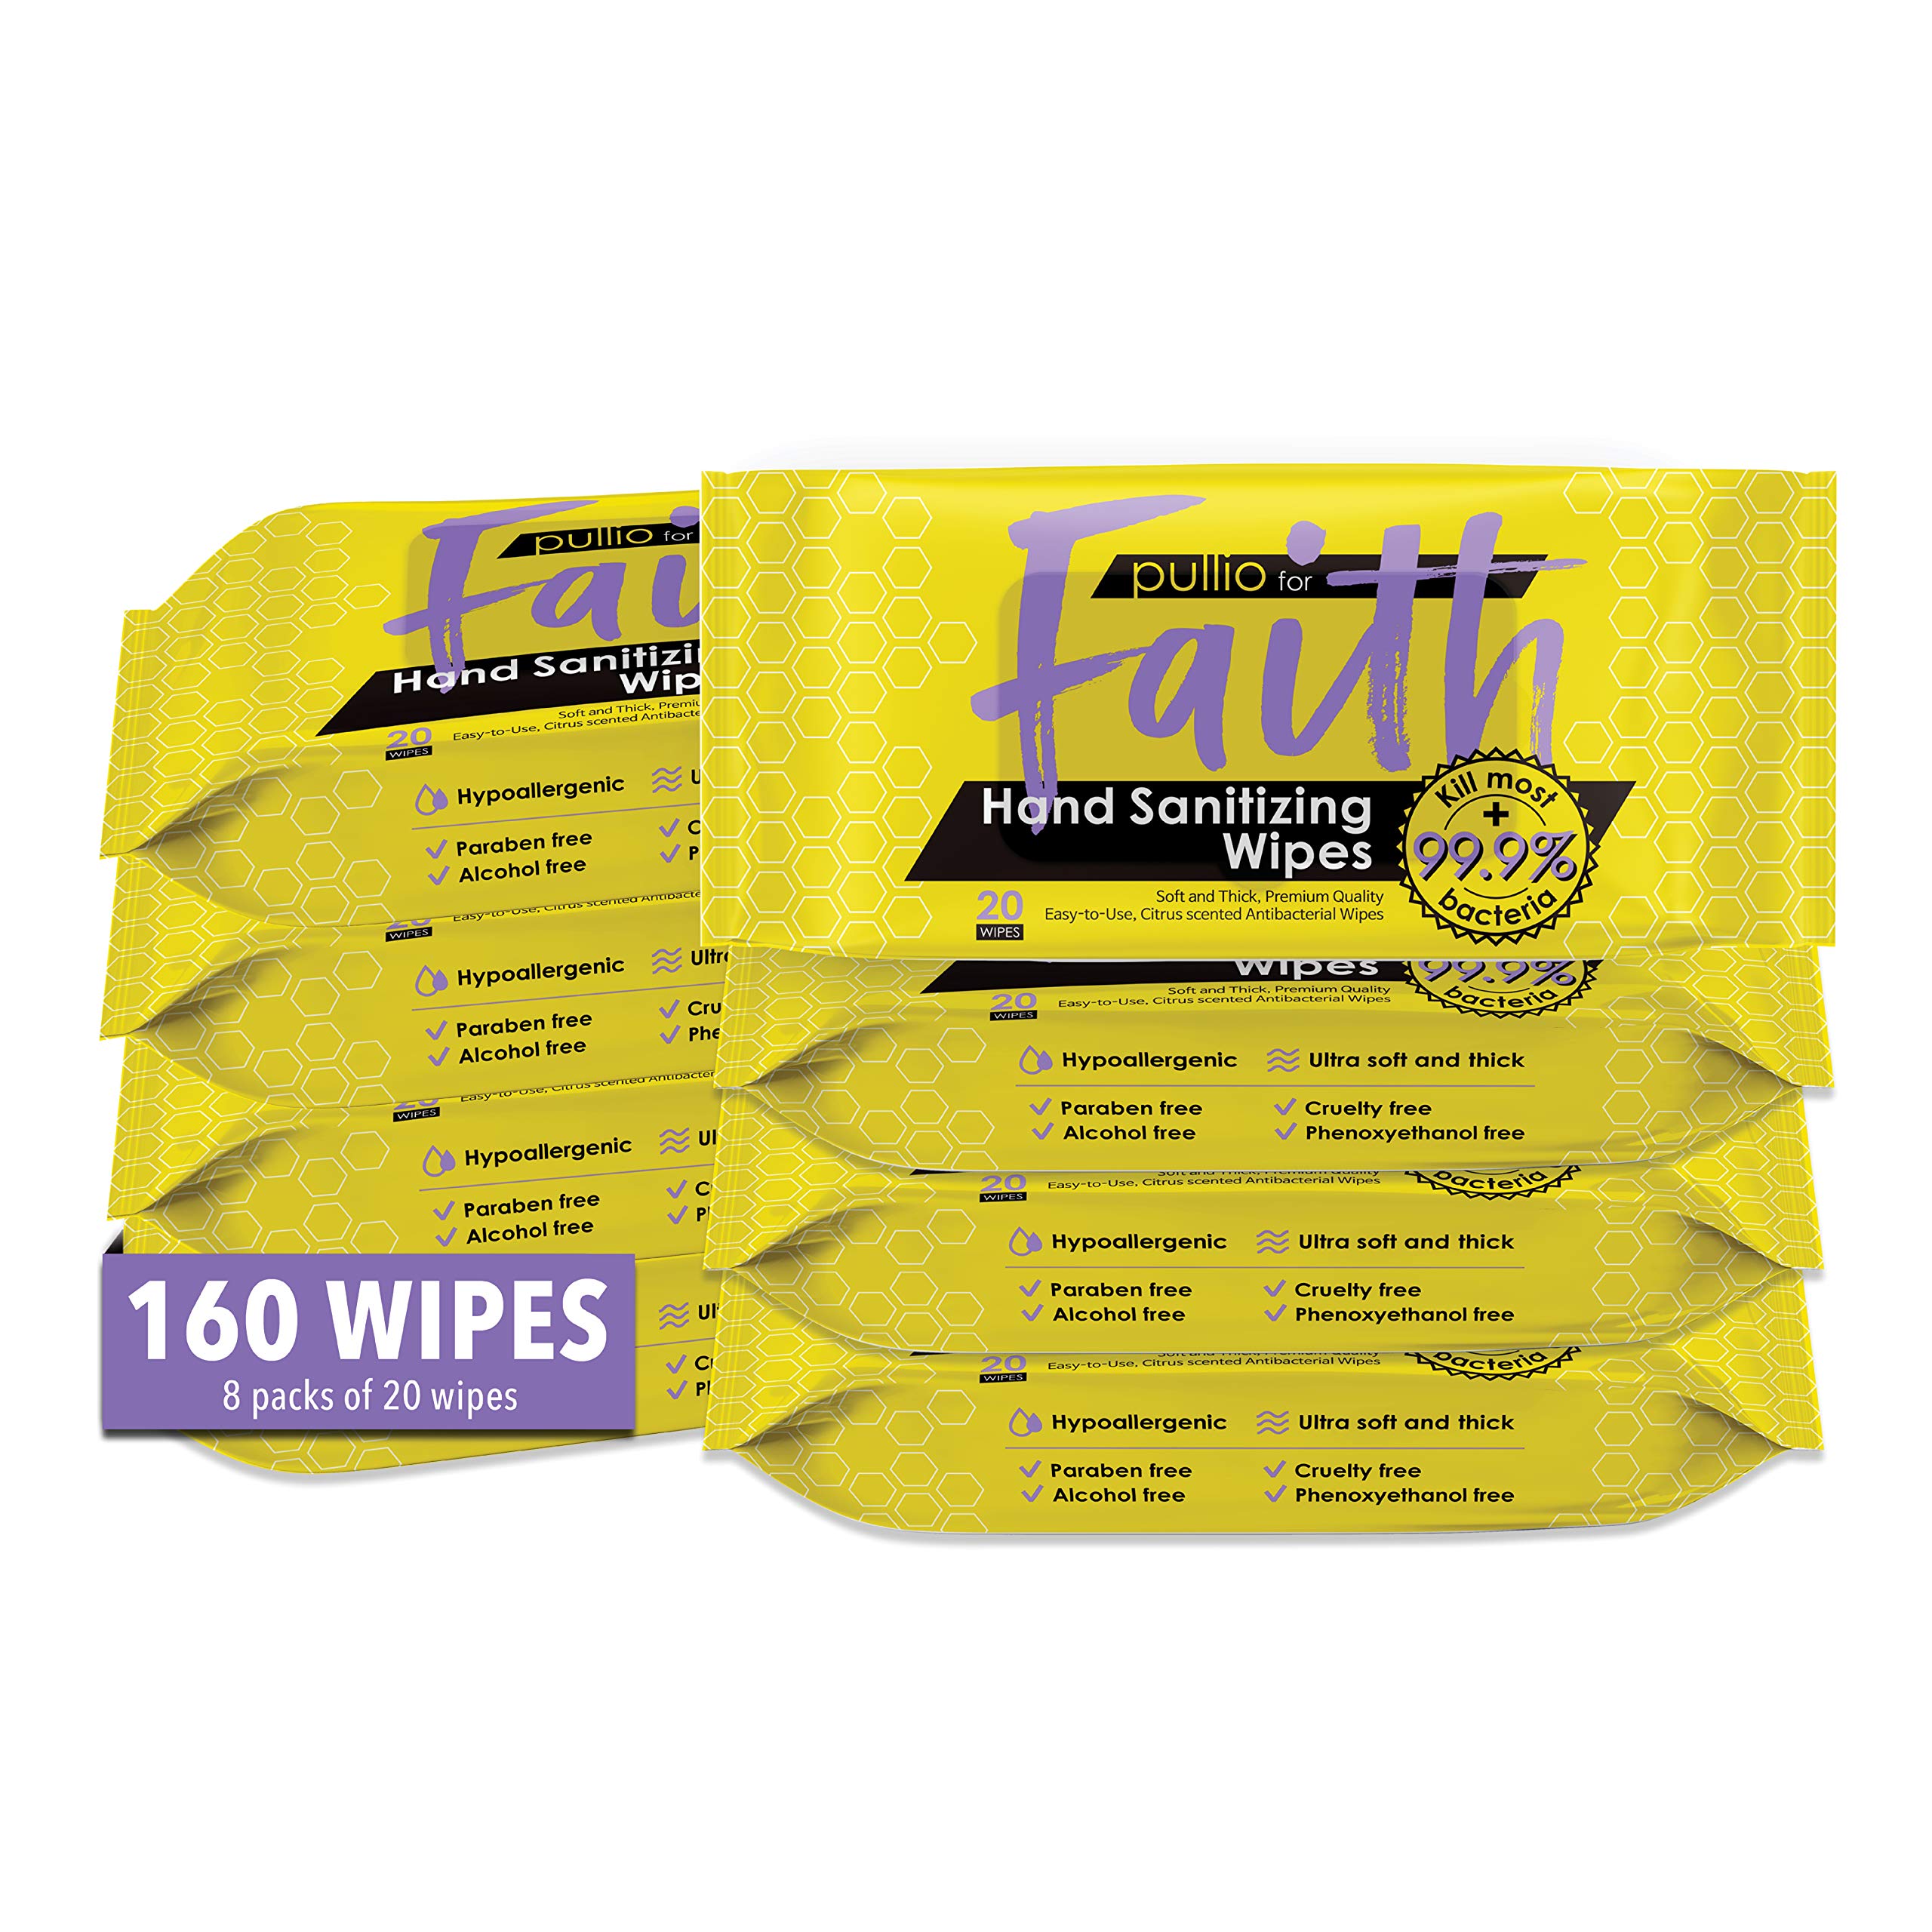 Wipe Out! 80-Pack 80-Count Citrus Hand Sanitizer Wipes at